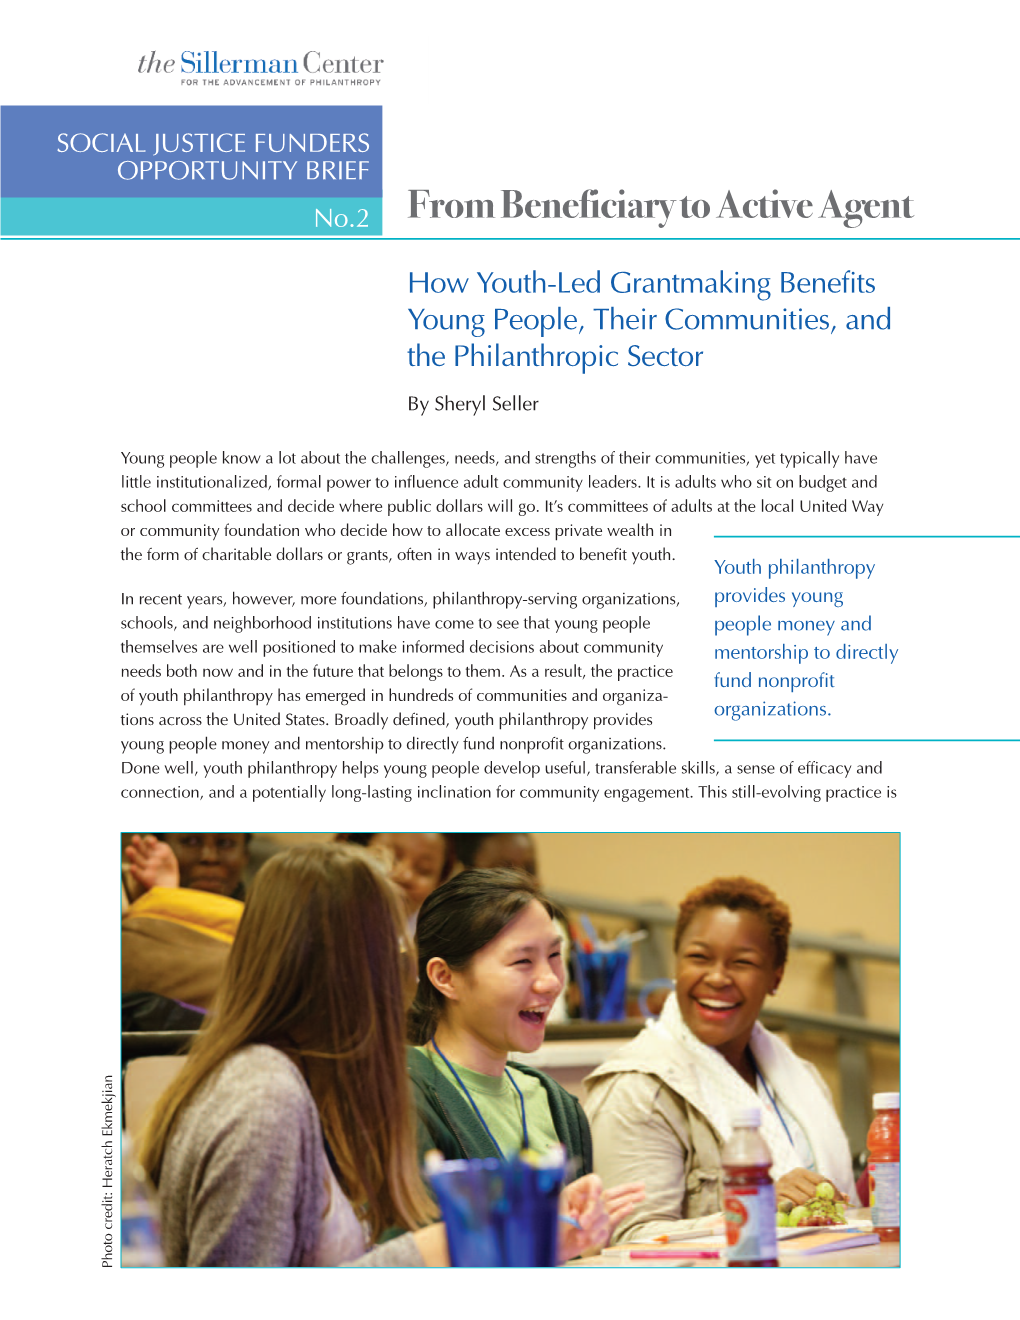 From Beneficiary to Active Agent: How Youth-Led Grantmaking Benefits